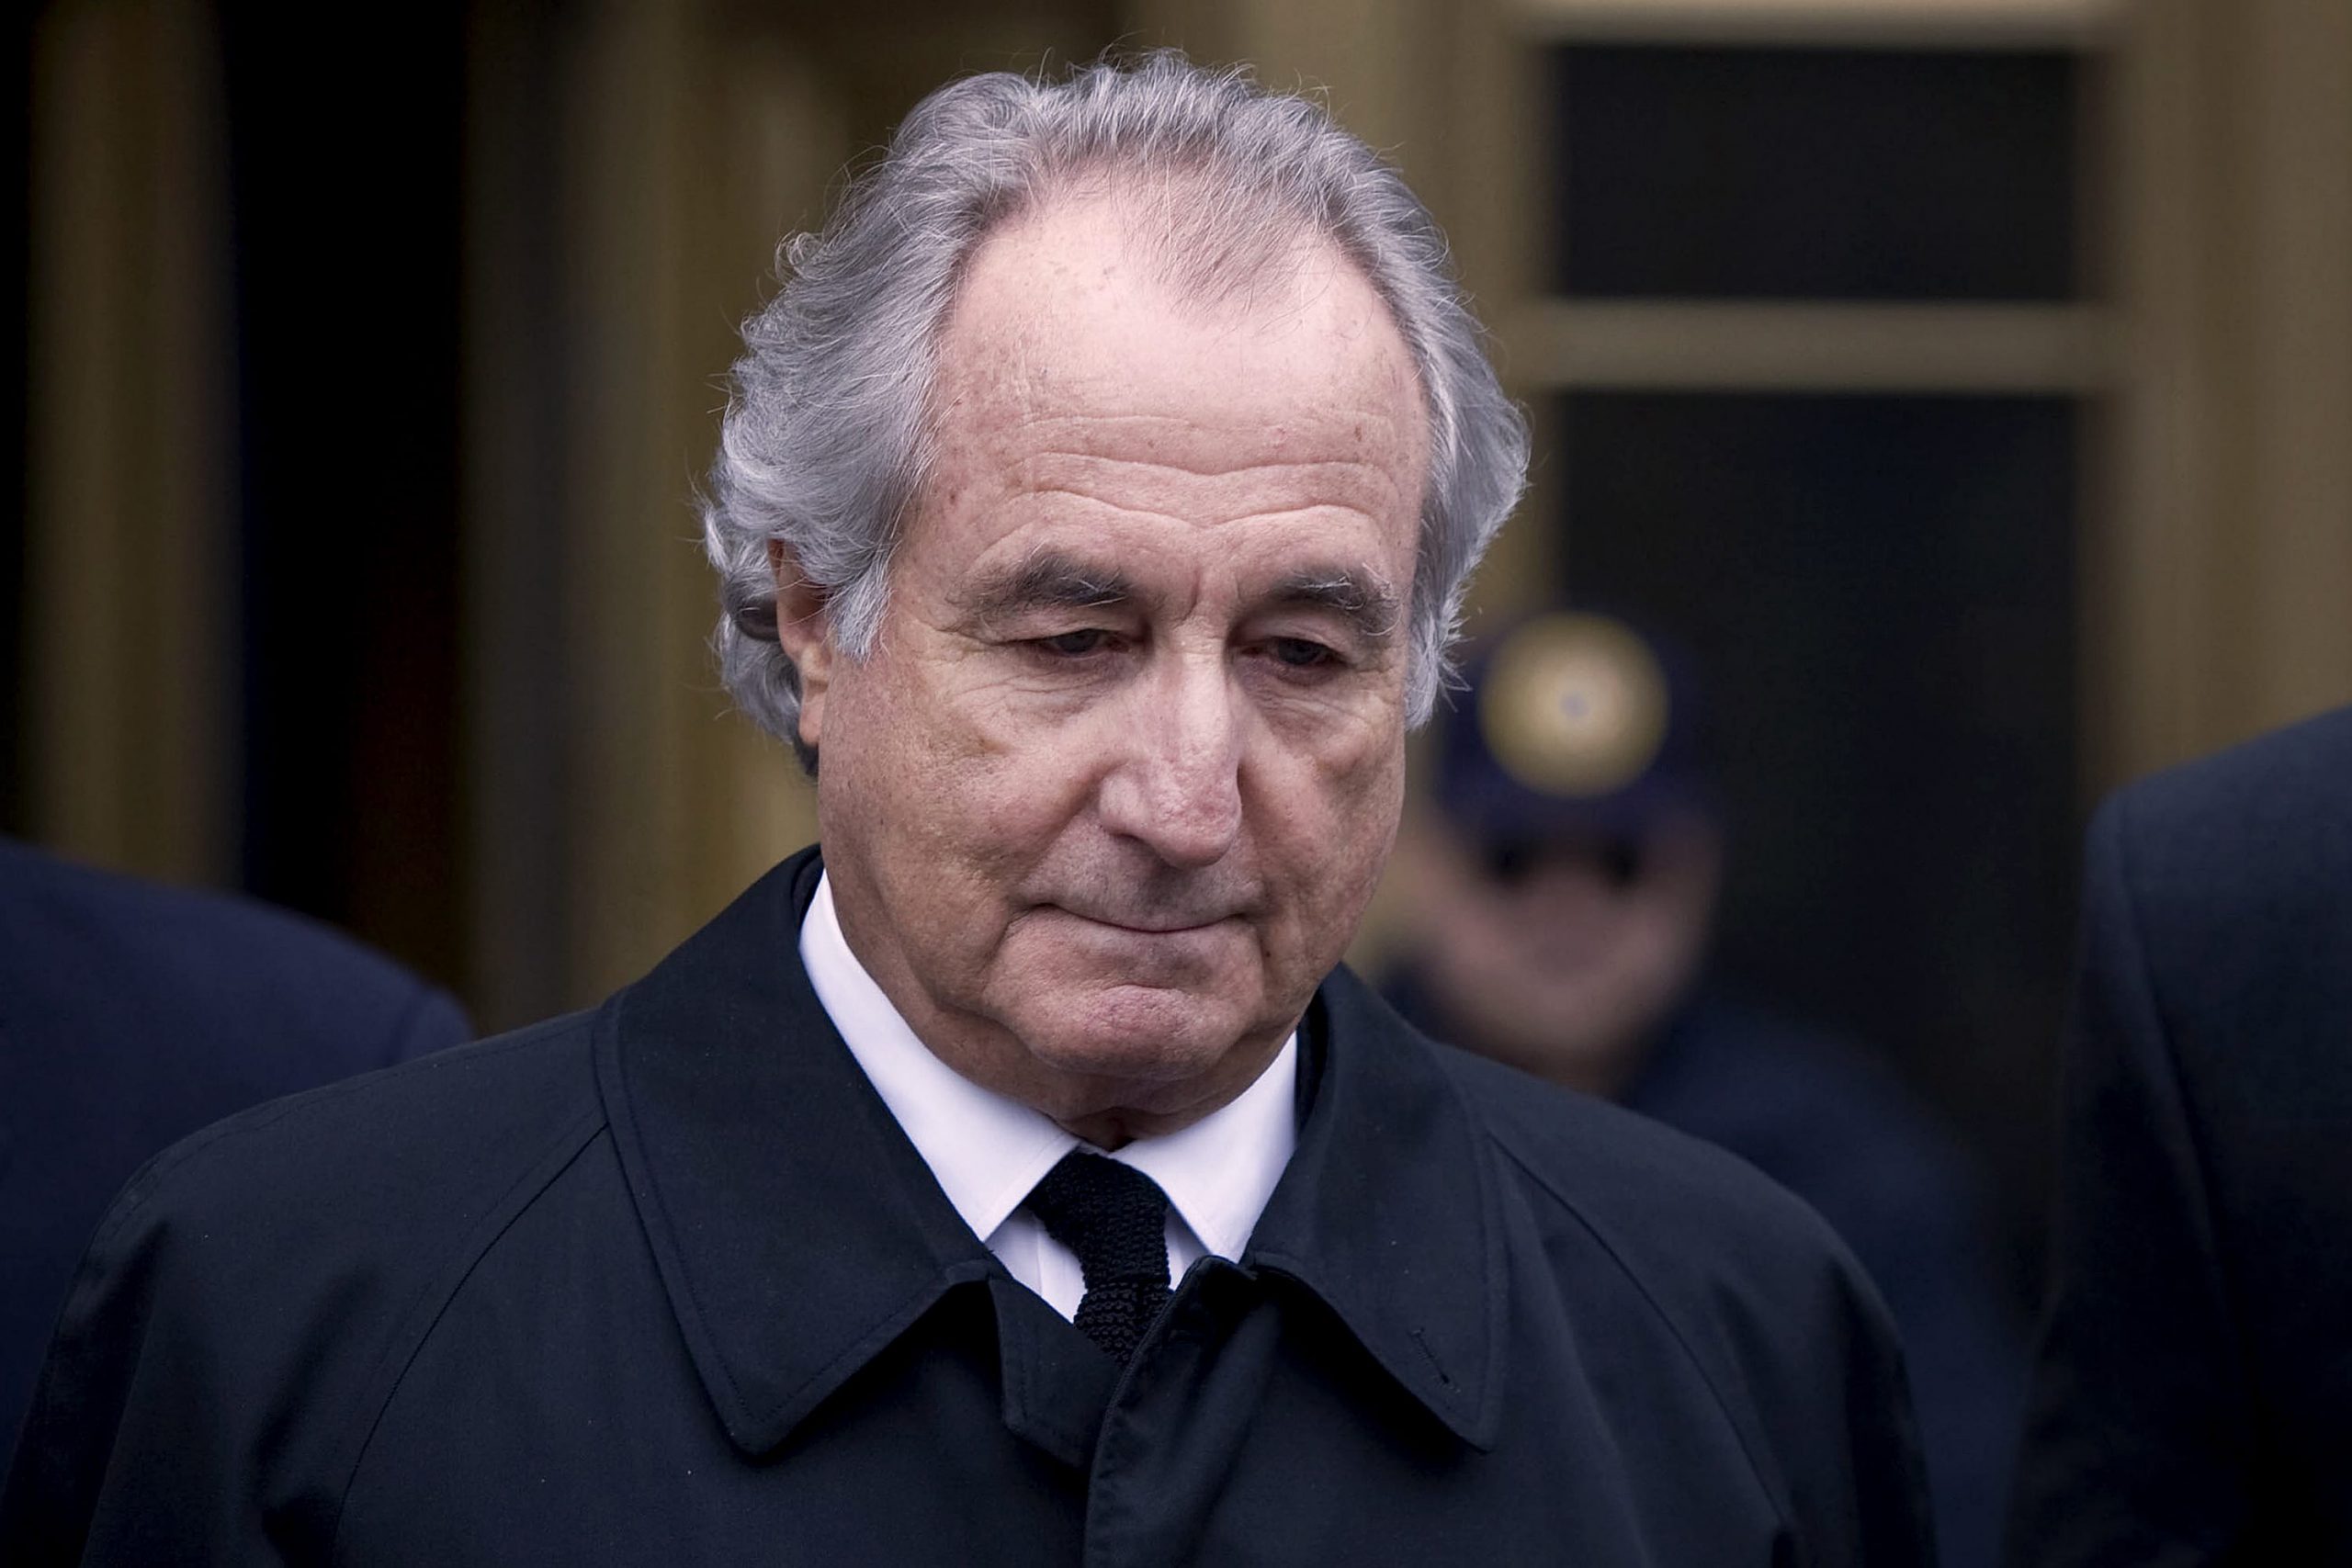 Ponzi schemer Madoff earned $710 for almost 3,000 hours of prison work, got 'not very dependable' review